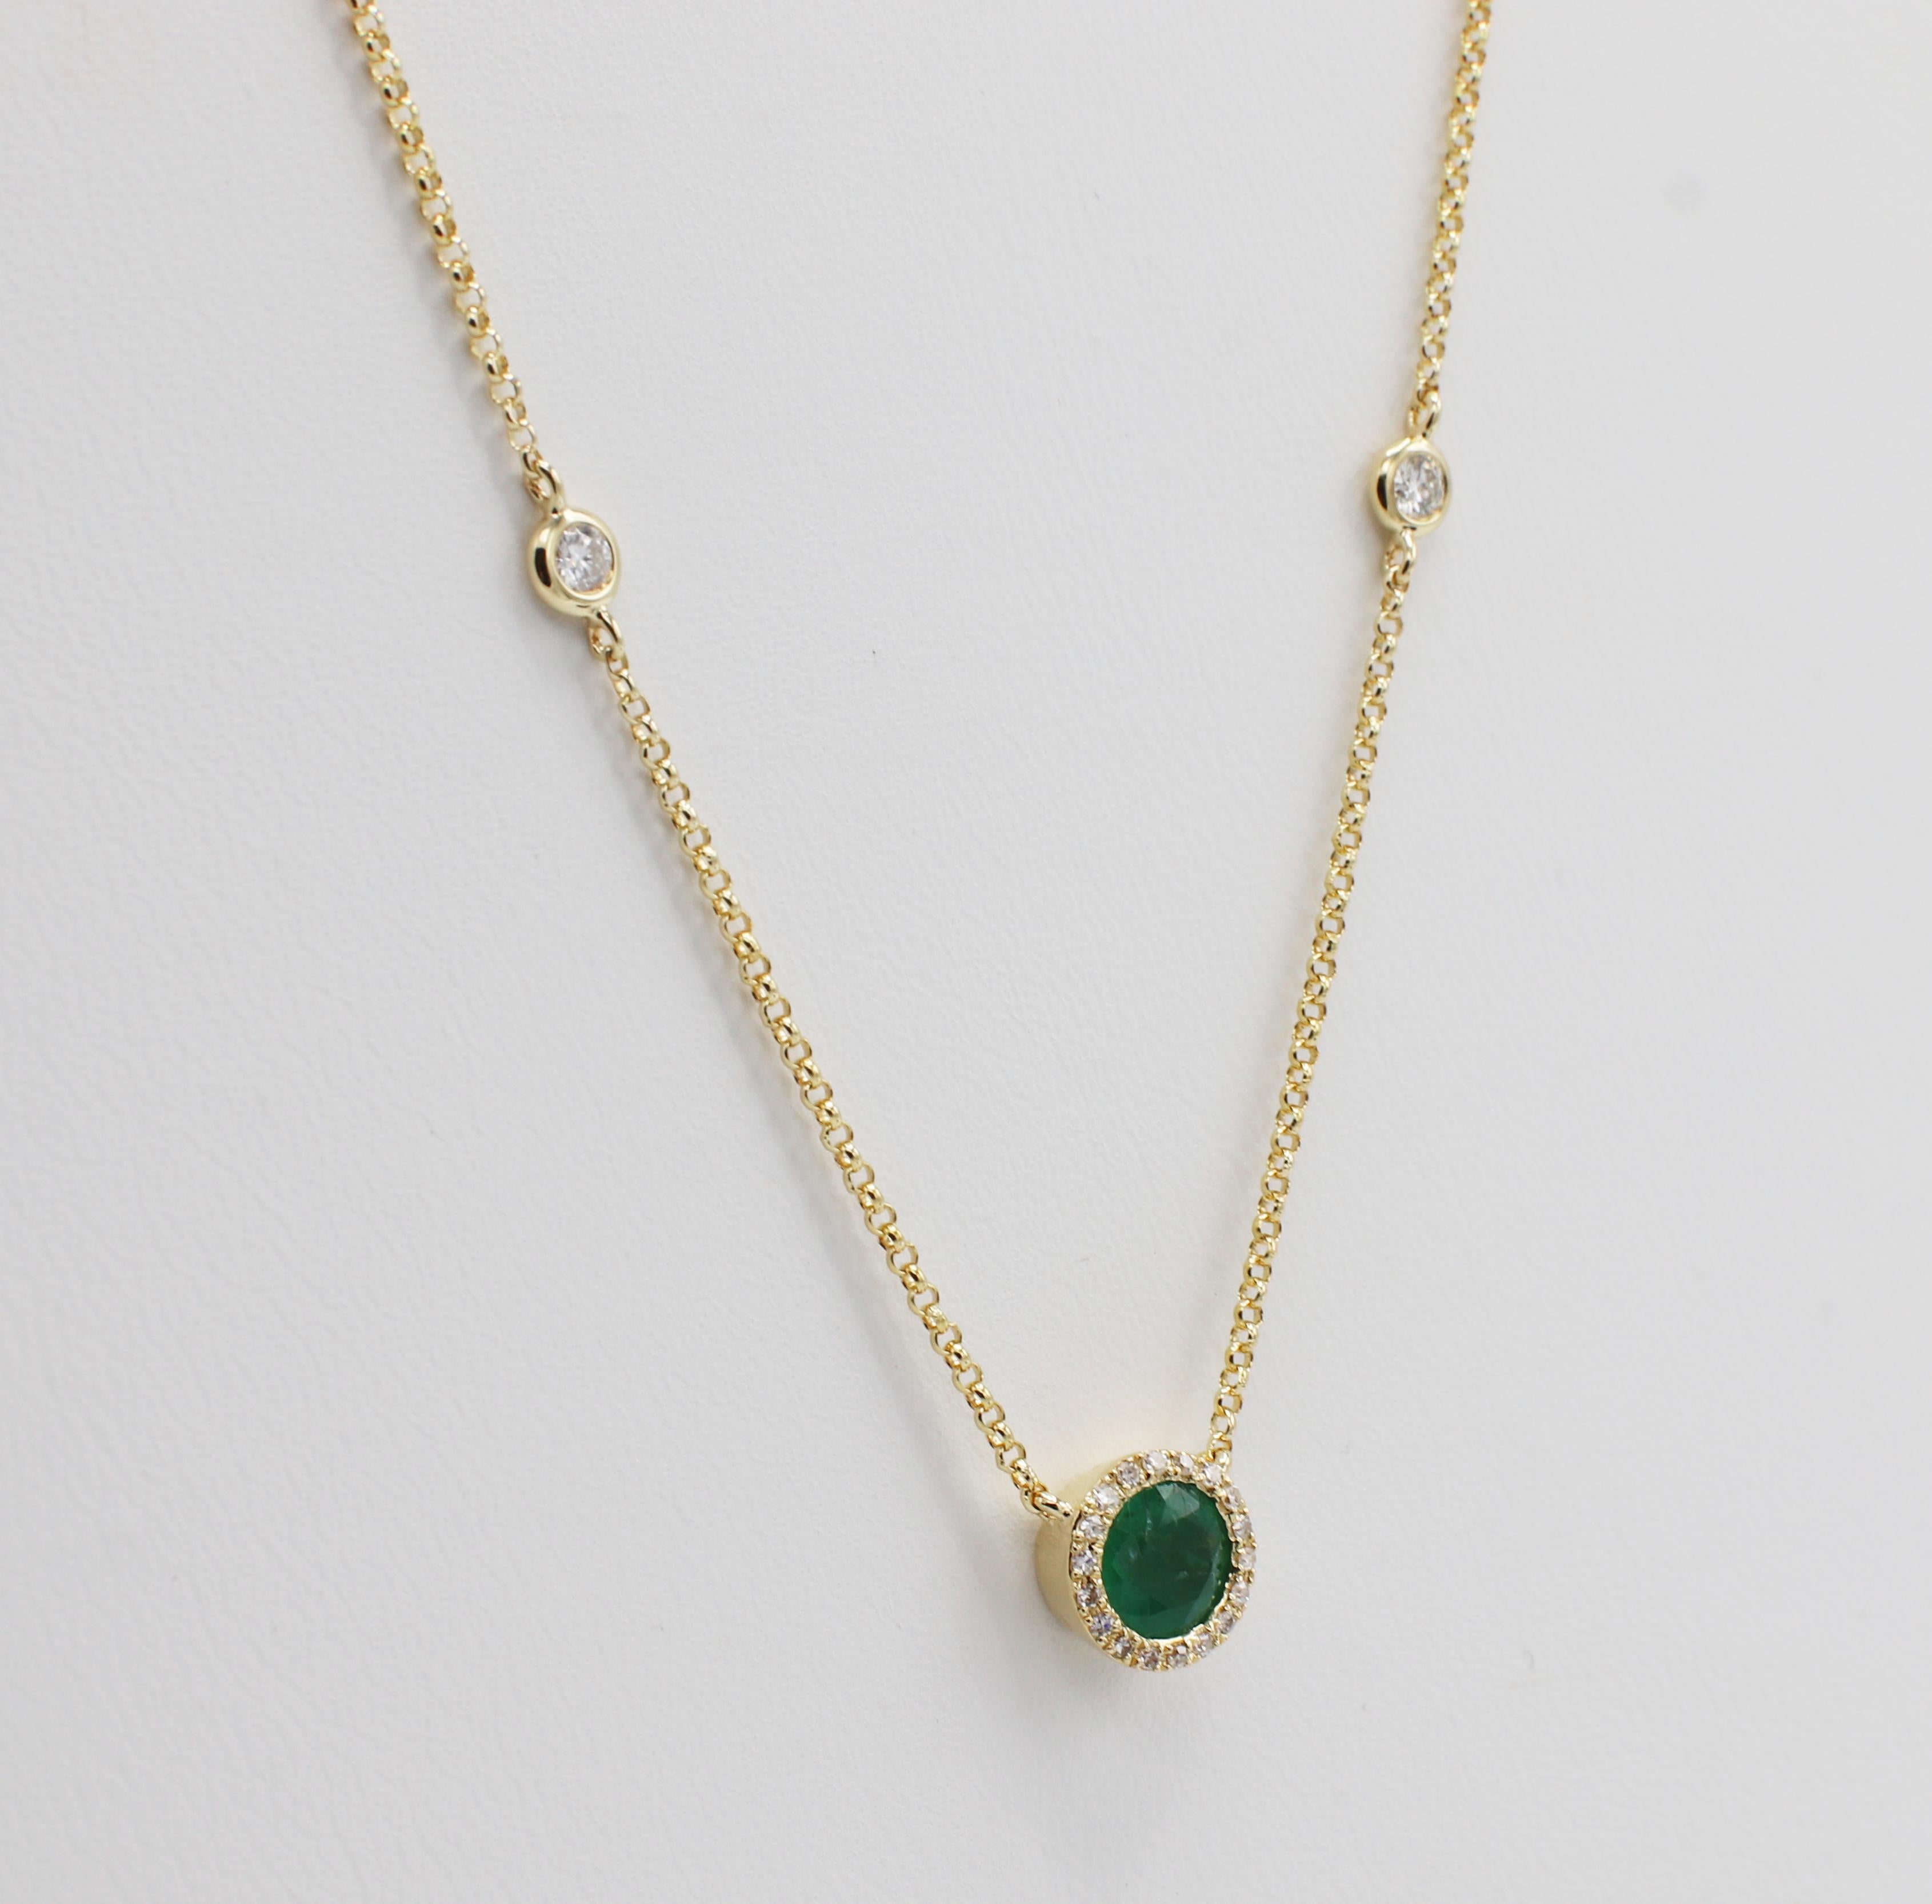 Effy Brasilica 14K Yellow Gold Emerald and Diamond By The Yard Necklace
Metal: 14k yellow gold
Weight: 3.1 grams
Diamonds: Approx. .50 CTW G VS
Emerald: Approx. .40 carats, 5.2mm
Length: 17.5 inches (has bales and can be worn at 17